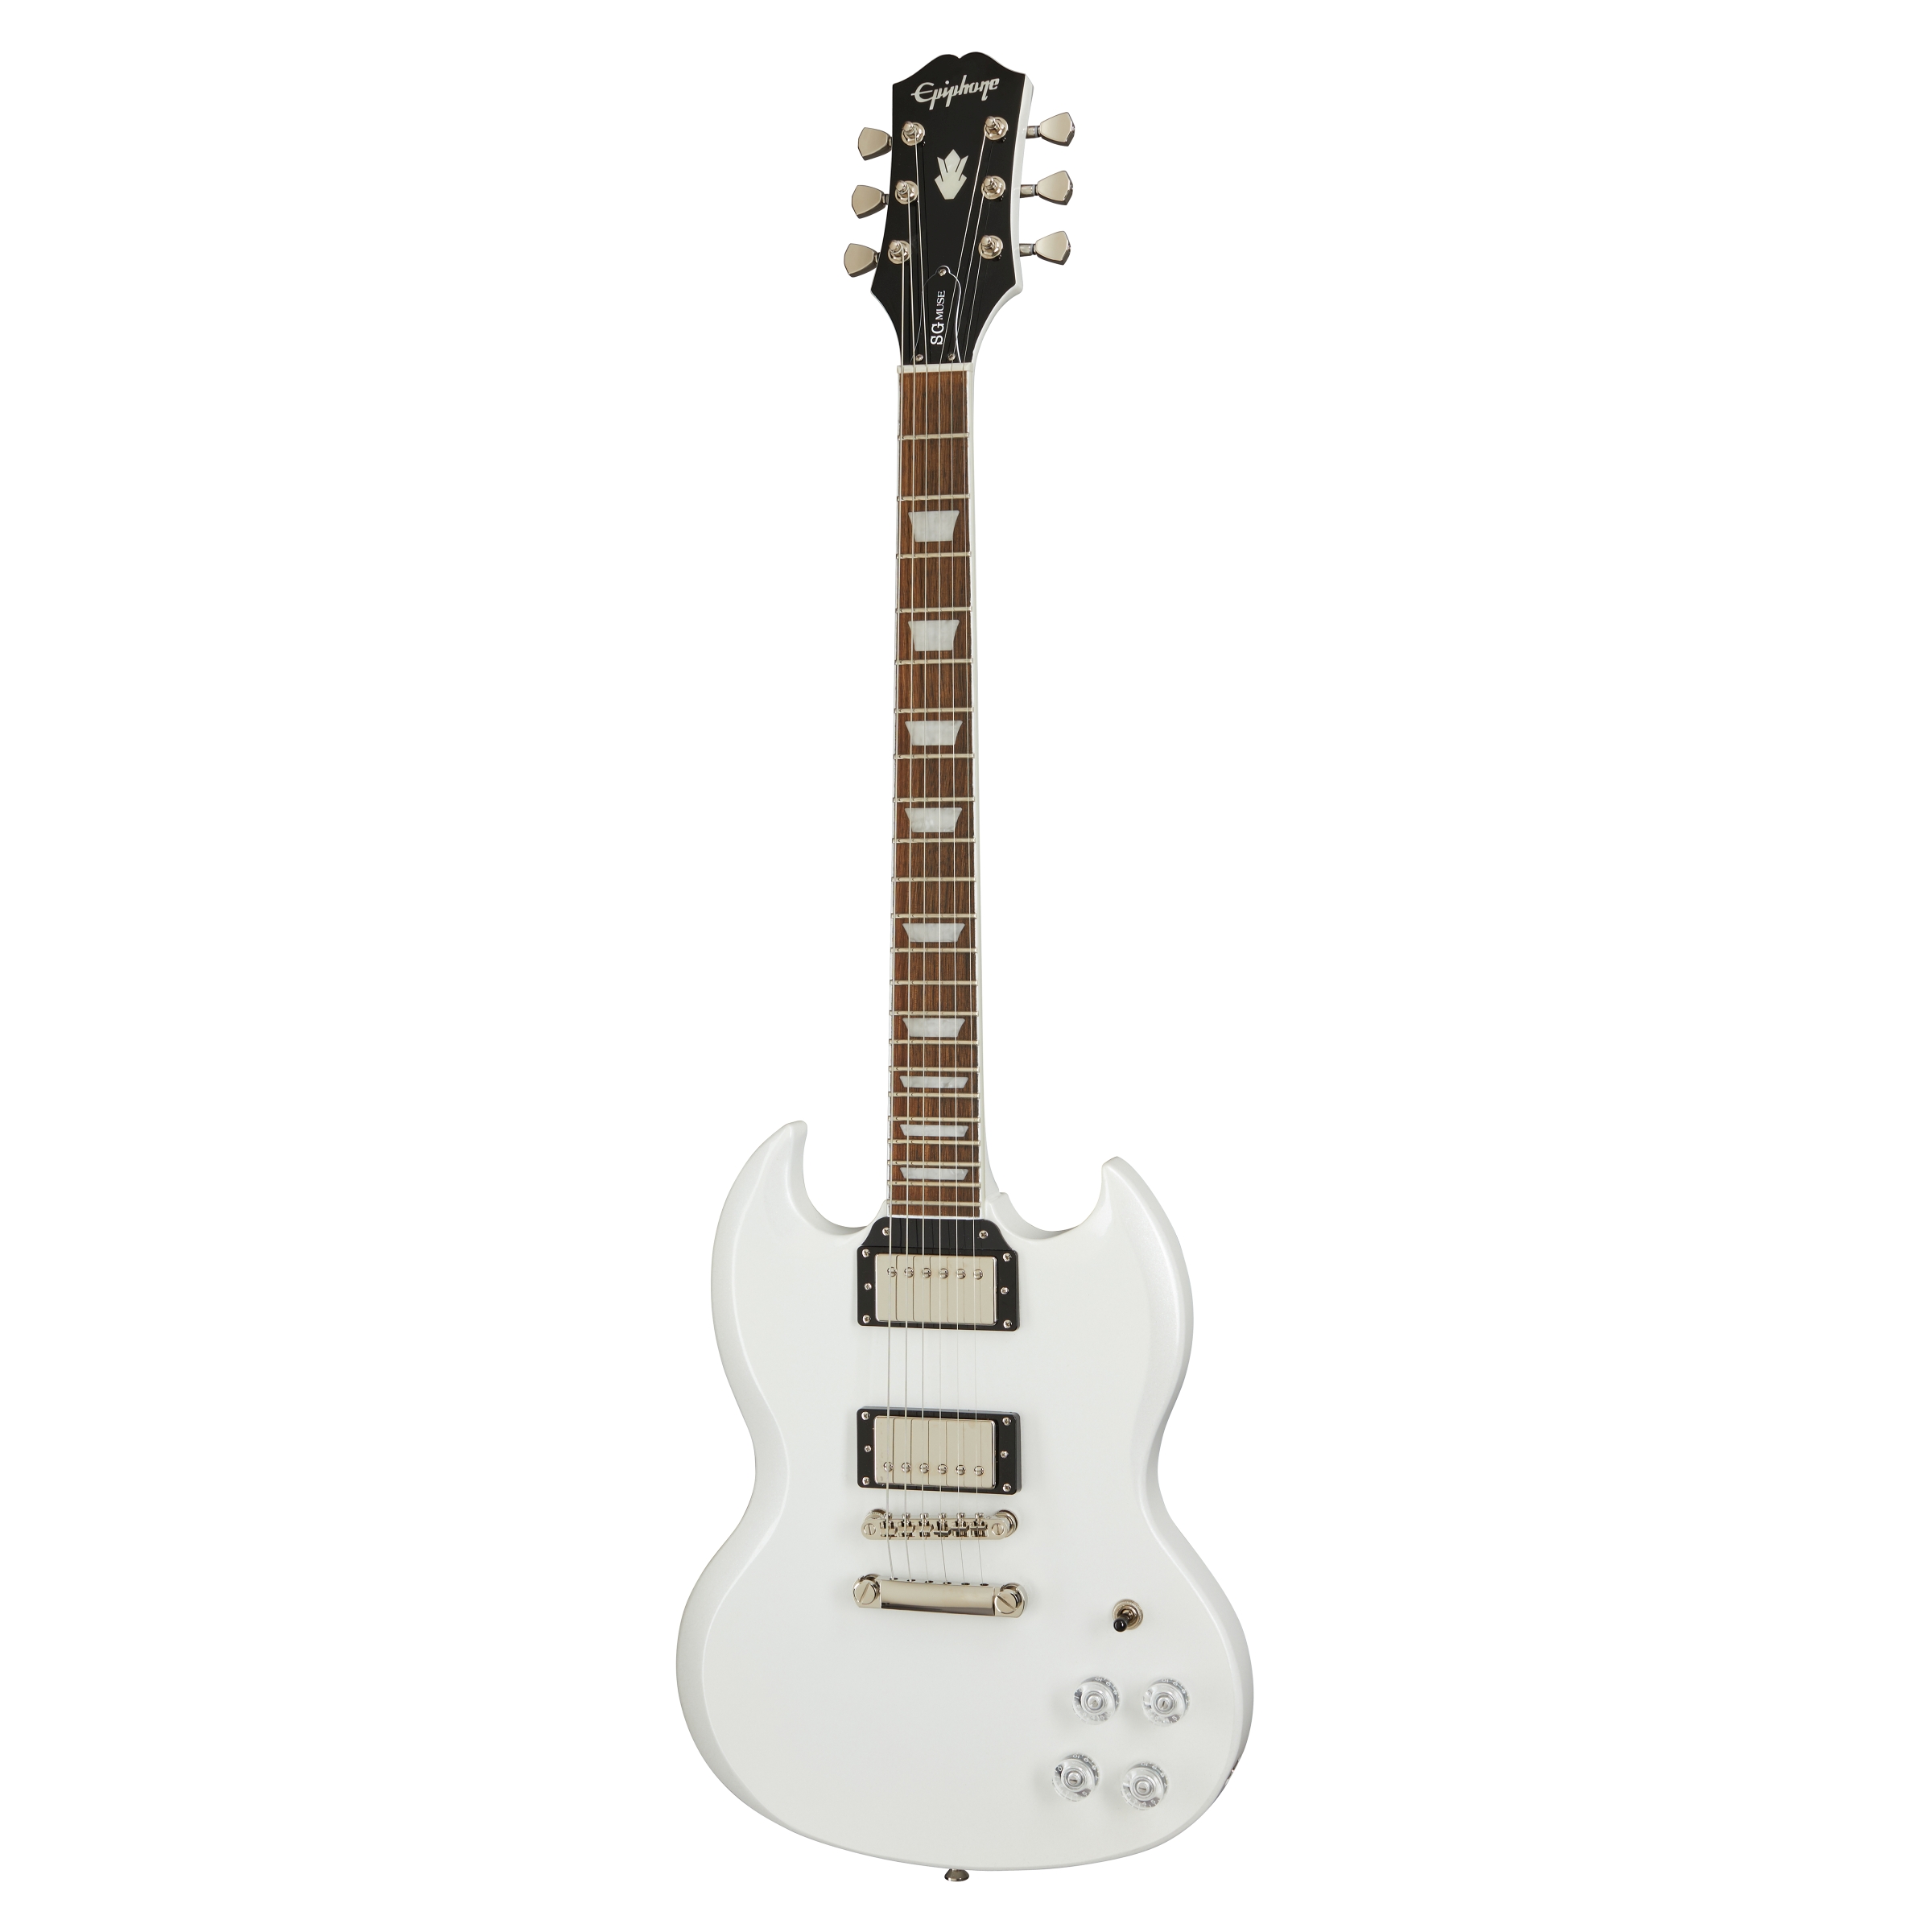 __static.gibson.com_product-images_Epiphone_EPI14B873_Pearl_White_Metallic_ENMSPWMNH1_front